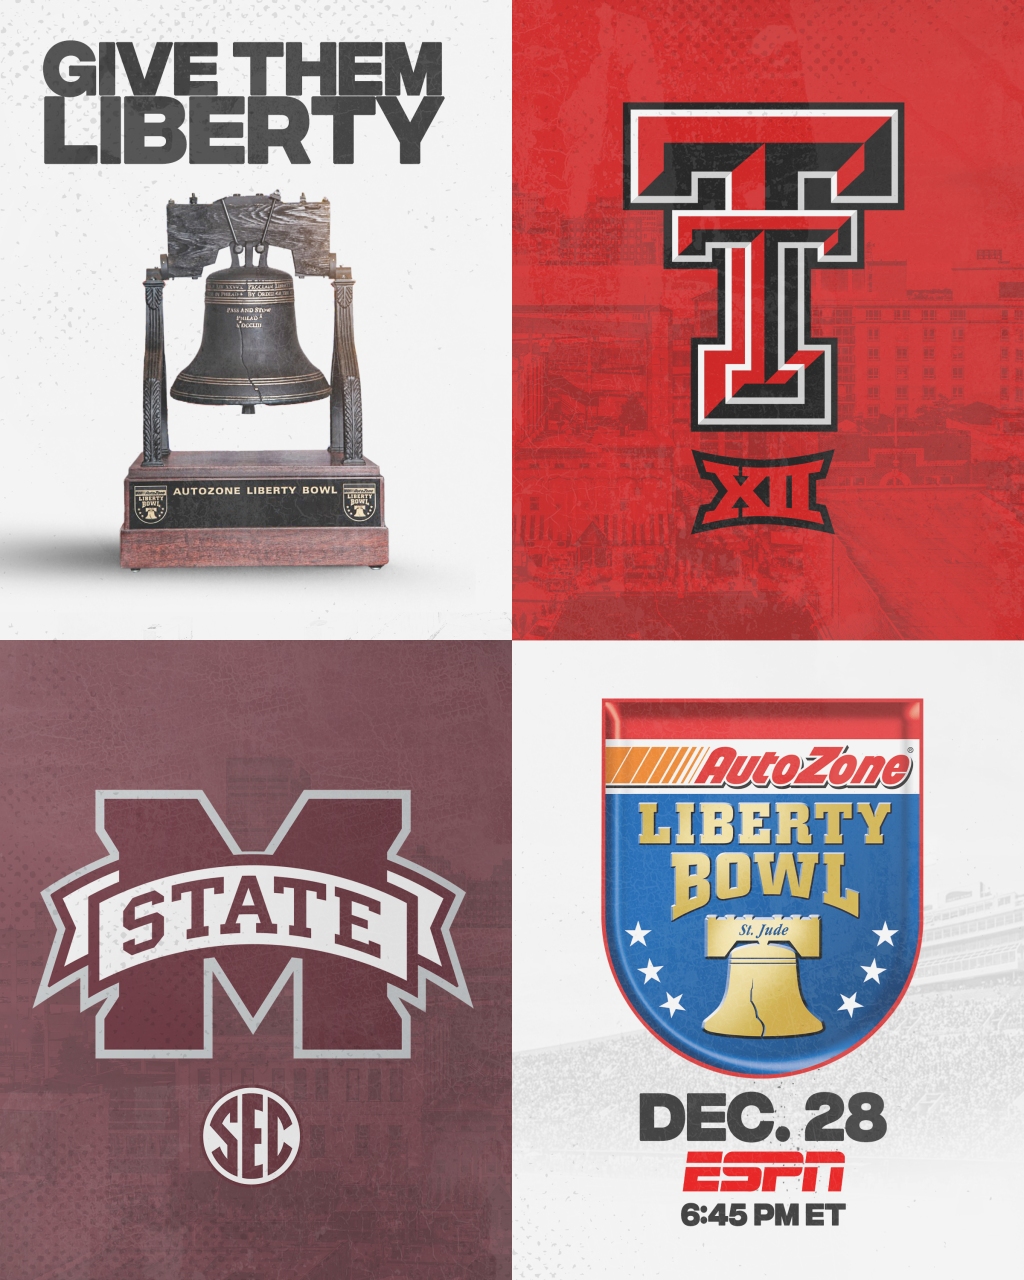 An early look at the 2021 AutoZone Liberty Bowl matchup between Mississippi State and Texas Tech